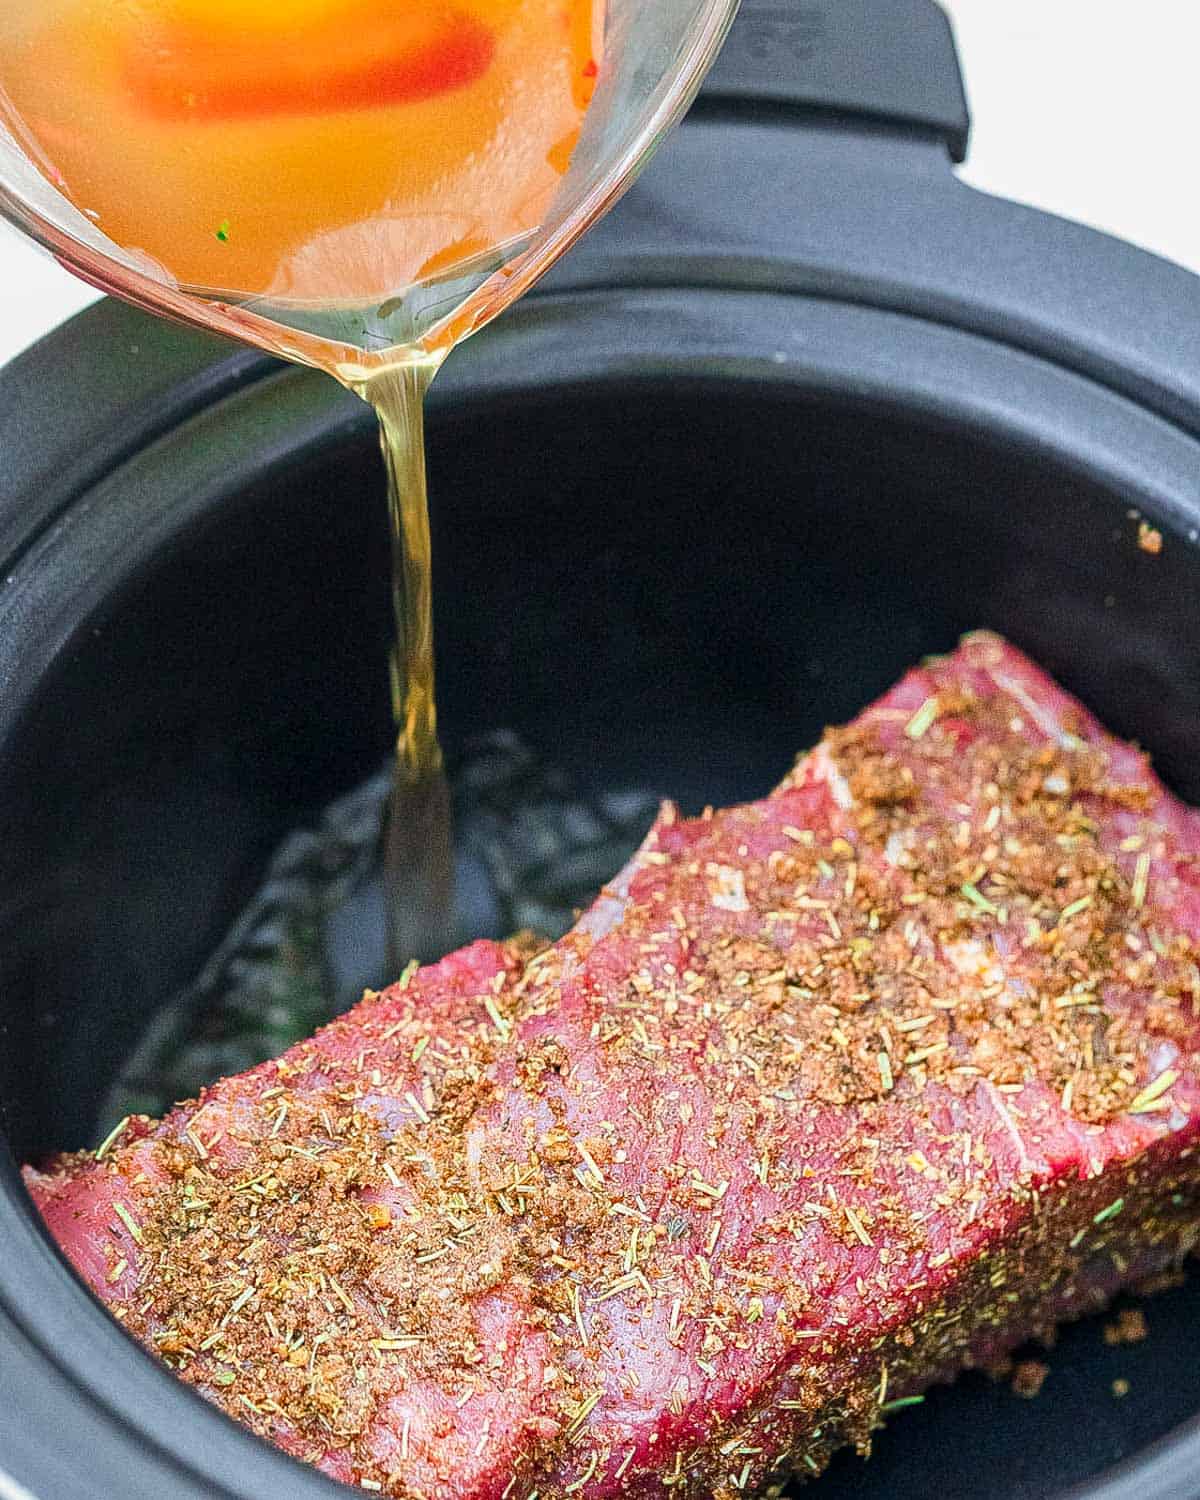 Seasoned tri tip roast in a slow cooker with broth being poured in.